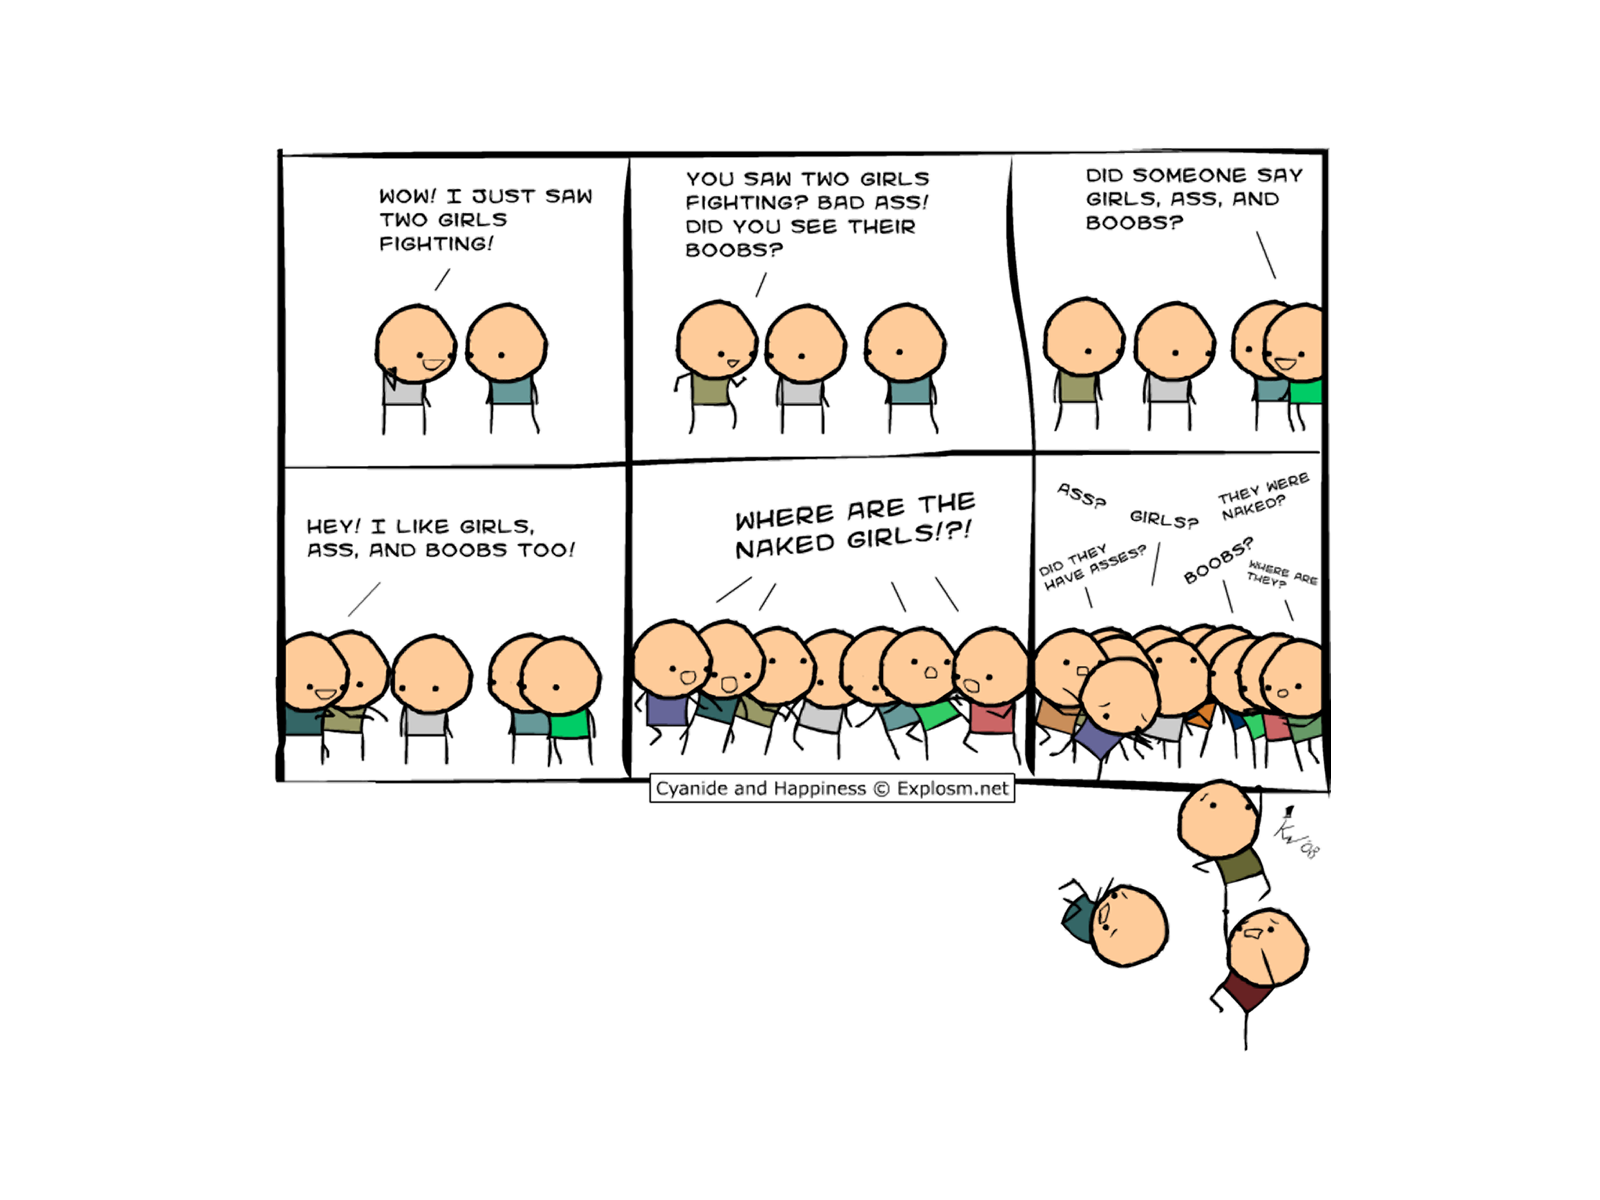 Cyanide and Happiness by explosm.net